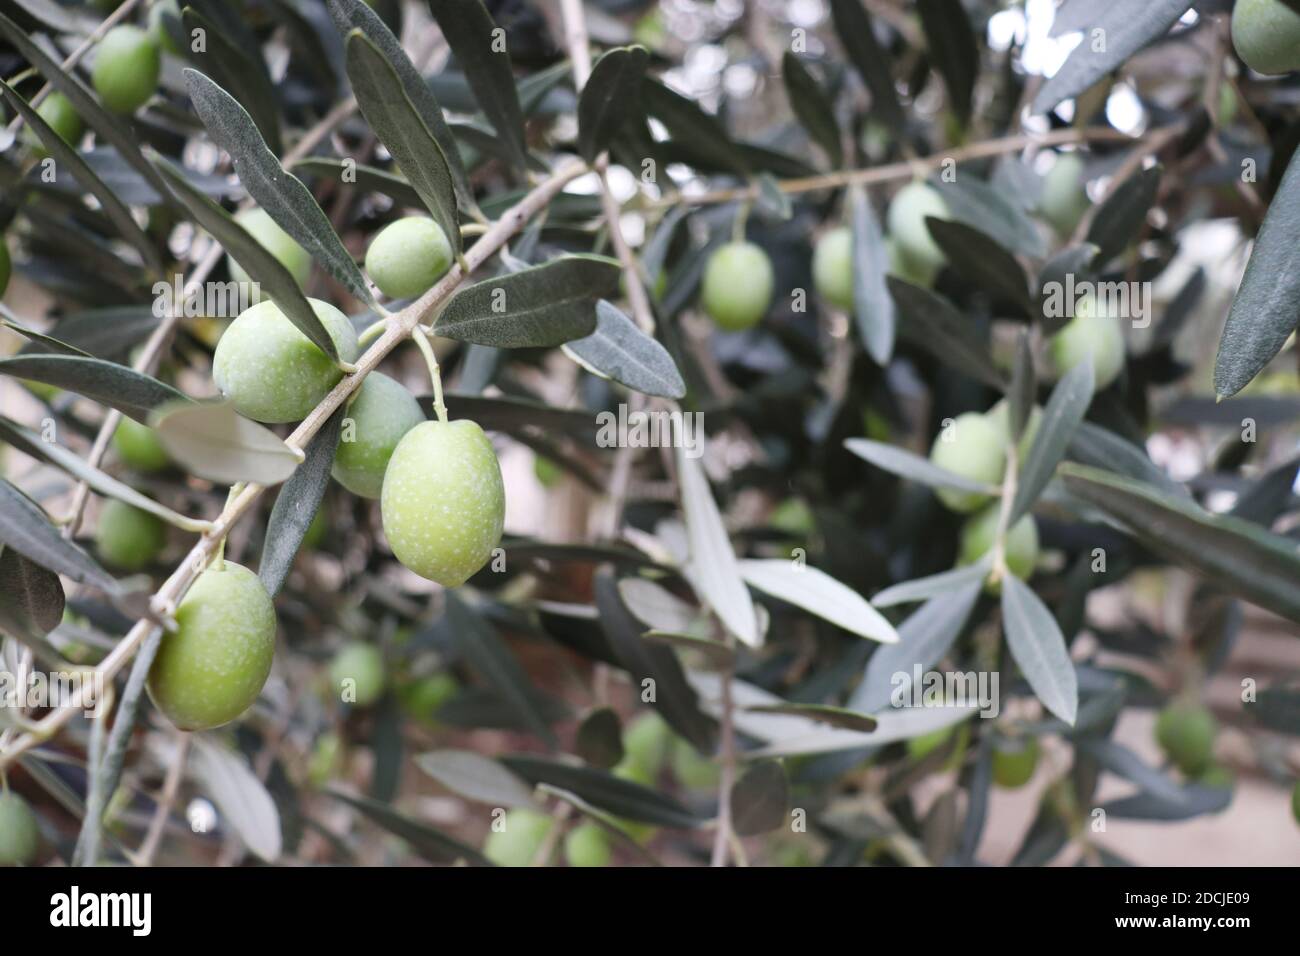 Olives in my garden Stock Photo